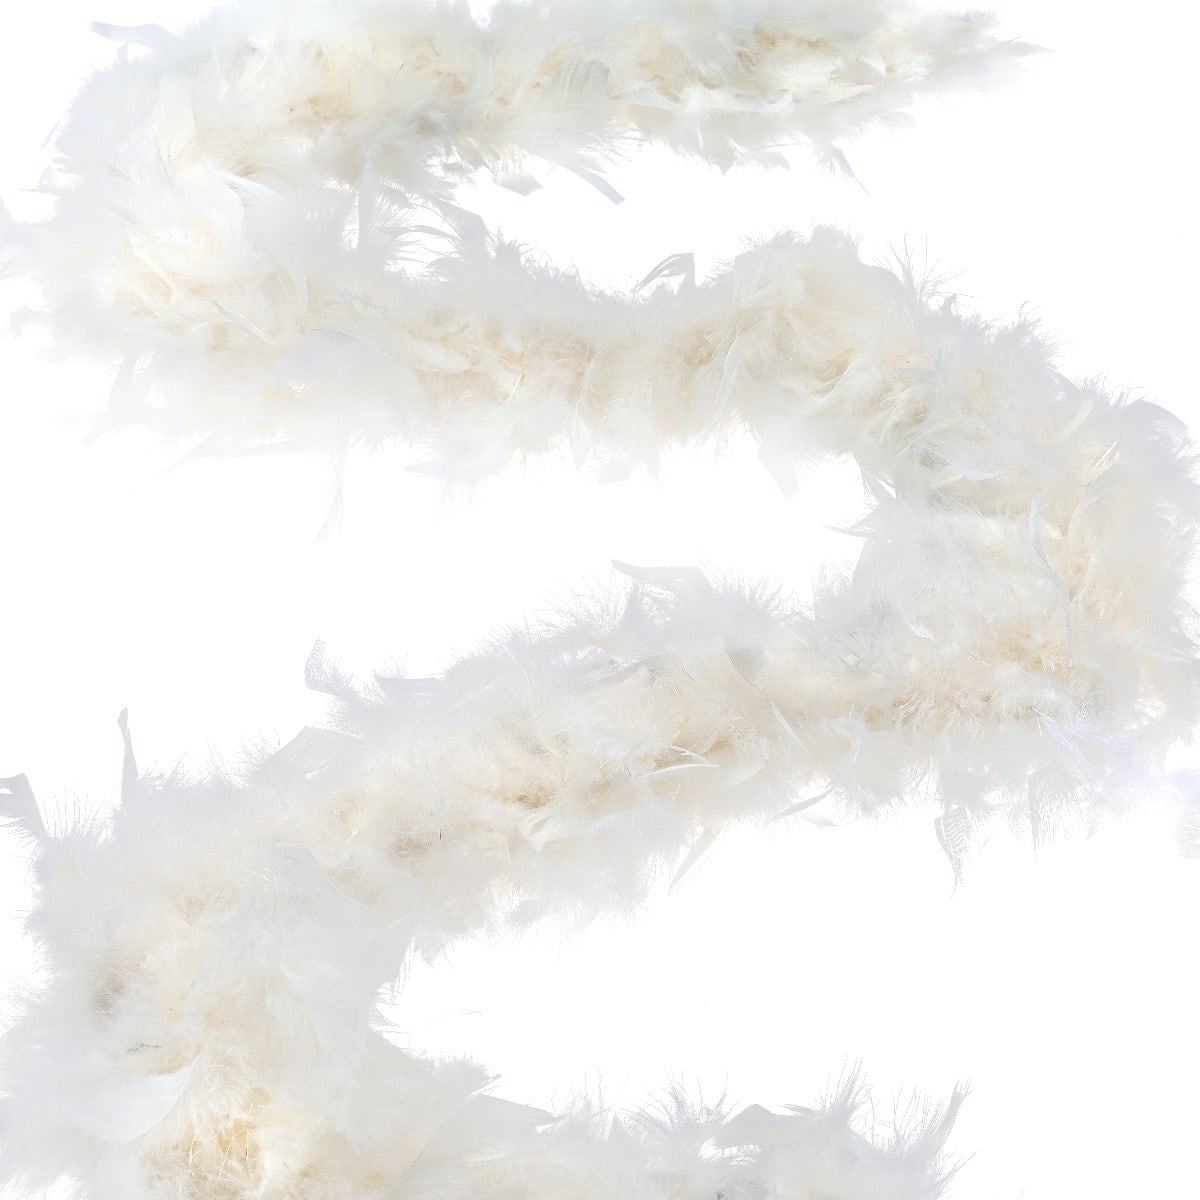 Chandelle Boas Solid Colors - Ivory